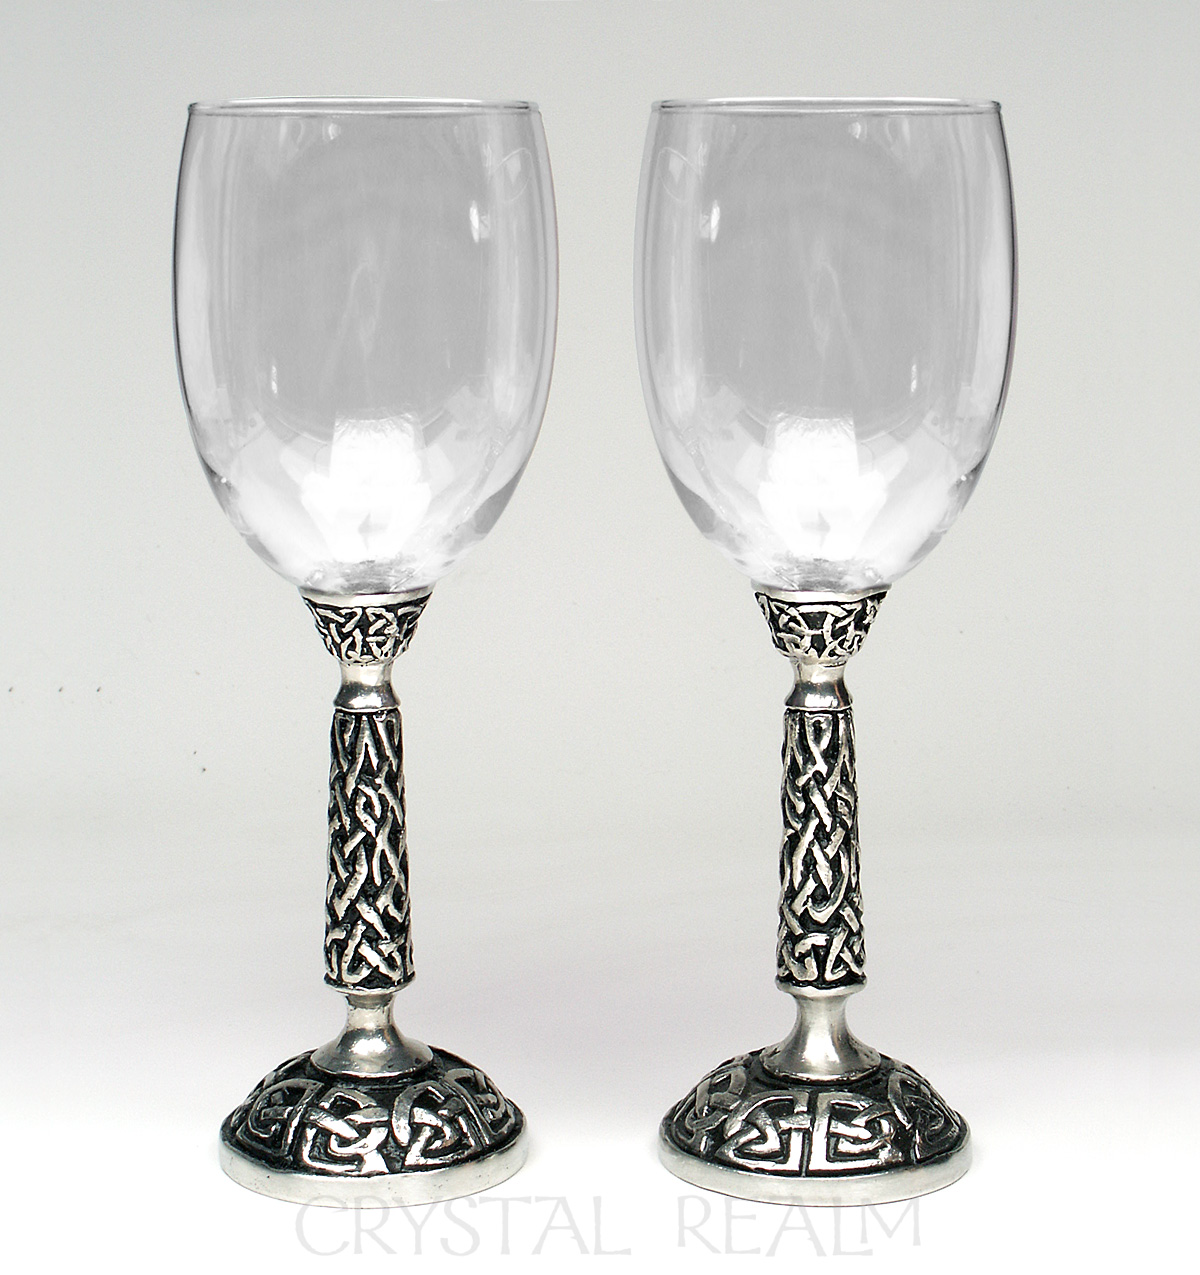 Celtic wine glass or communion glass in clear